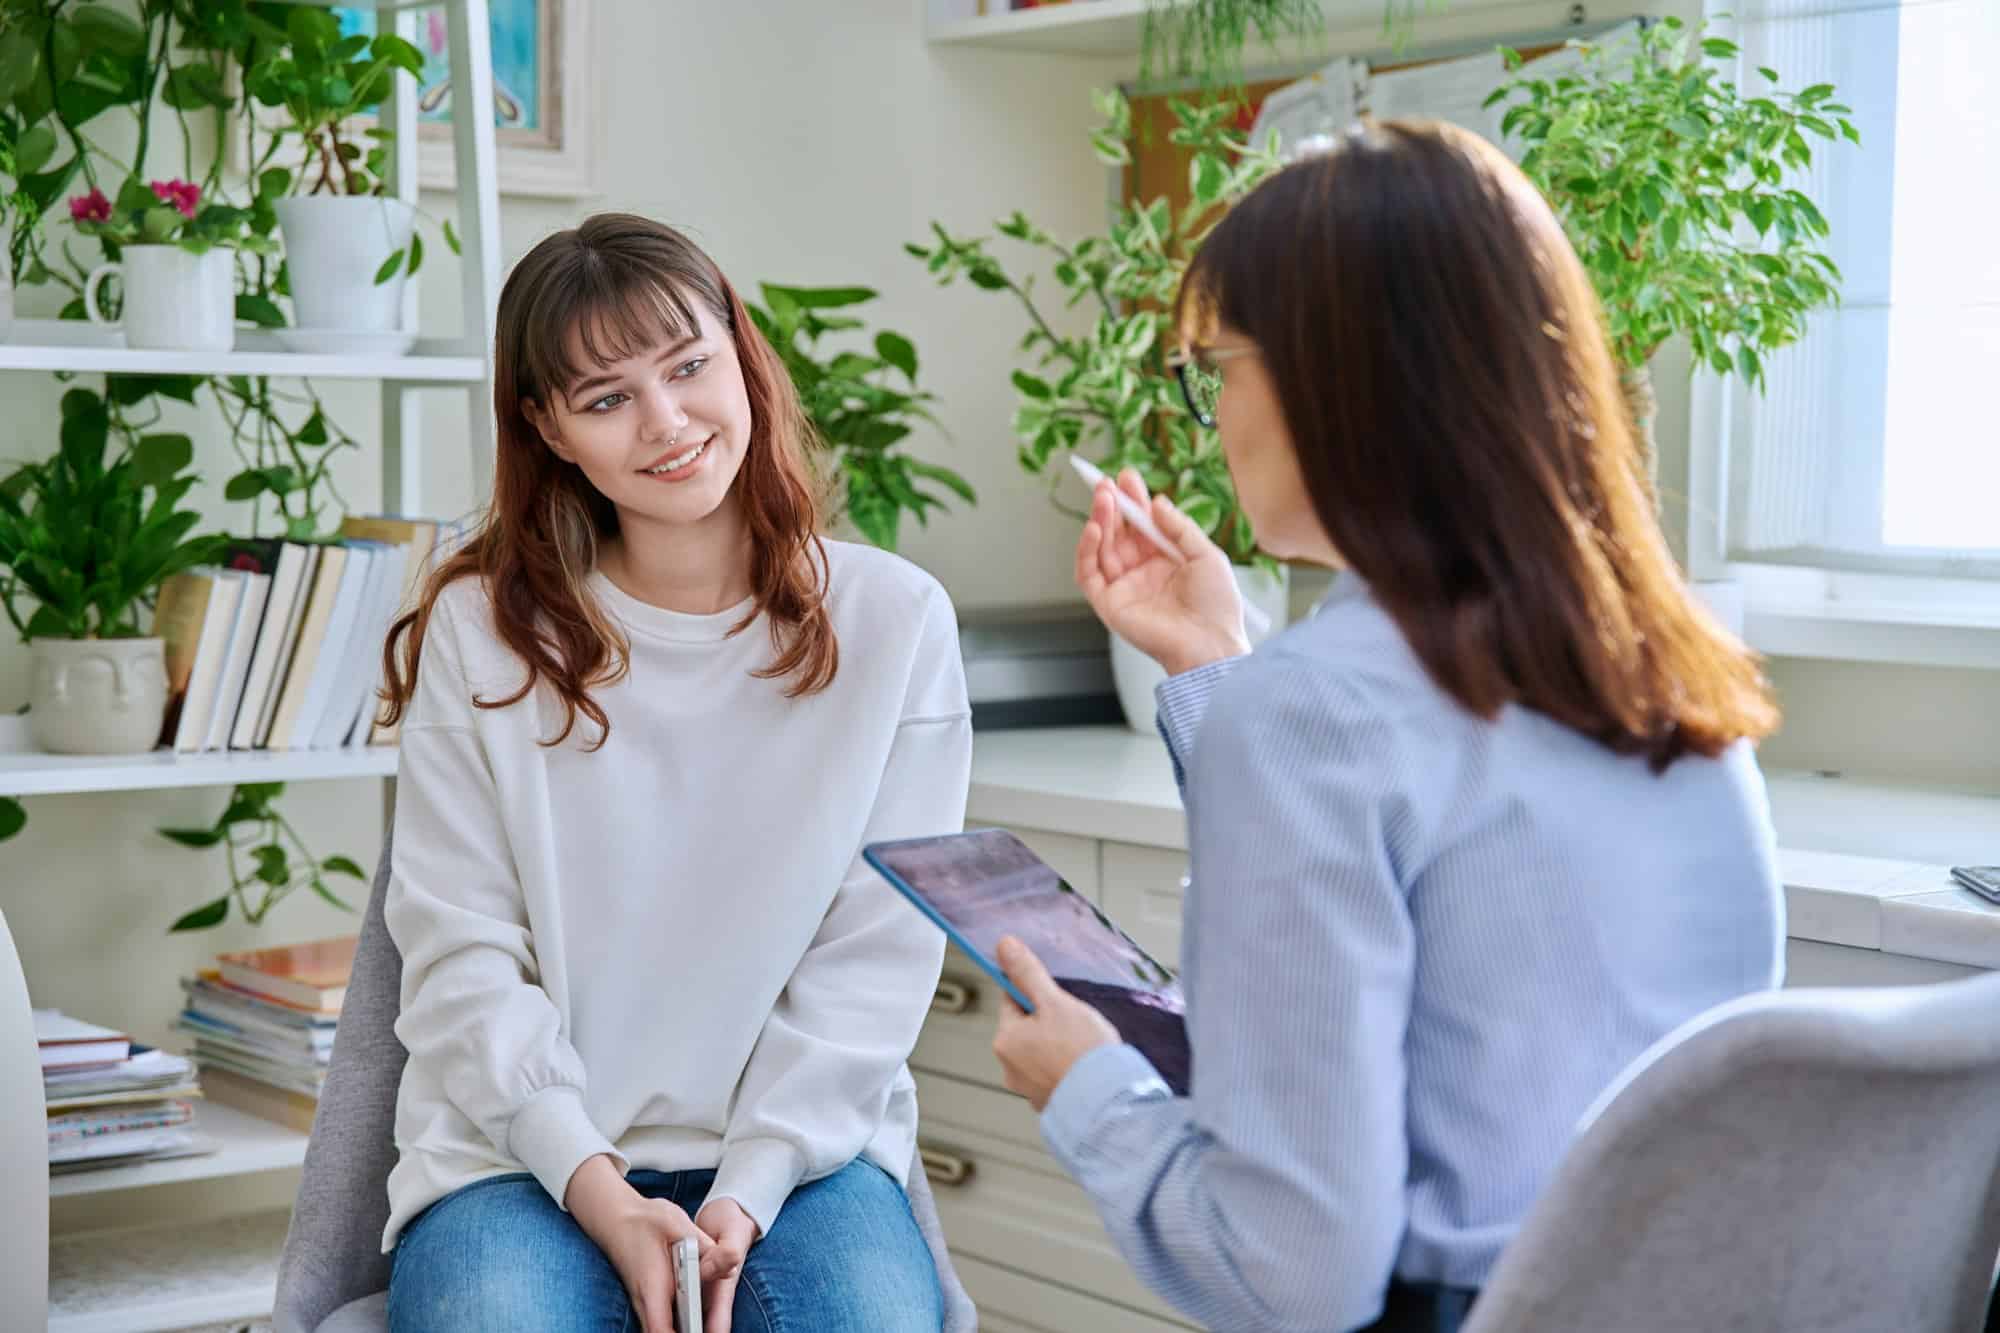 Teenage girl at therapy session with mental health professional